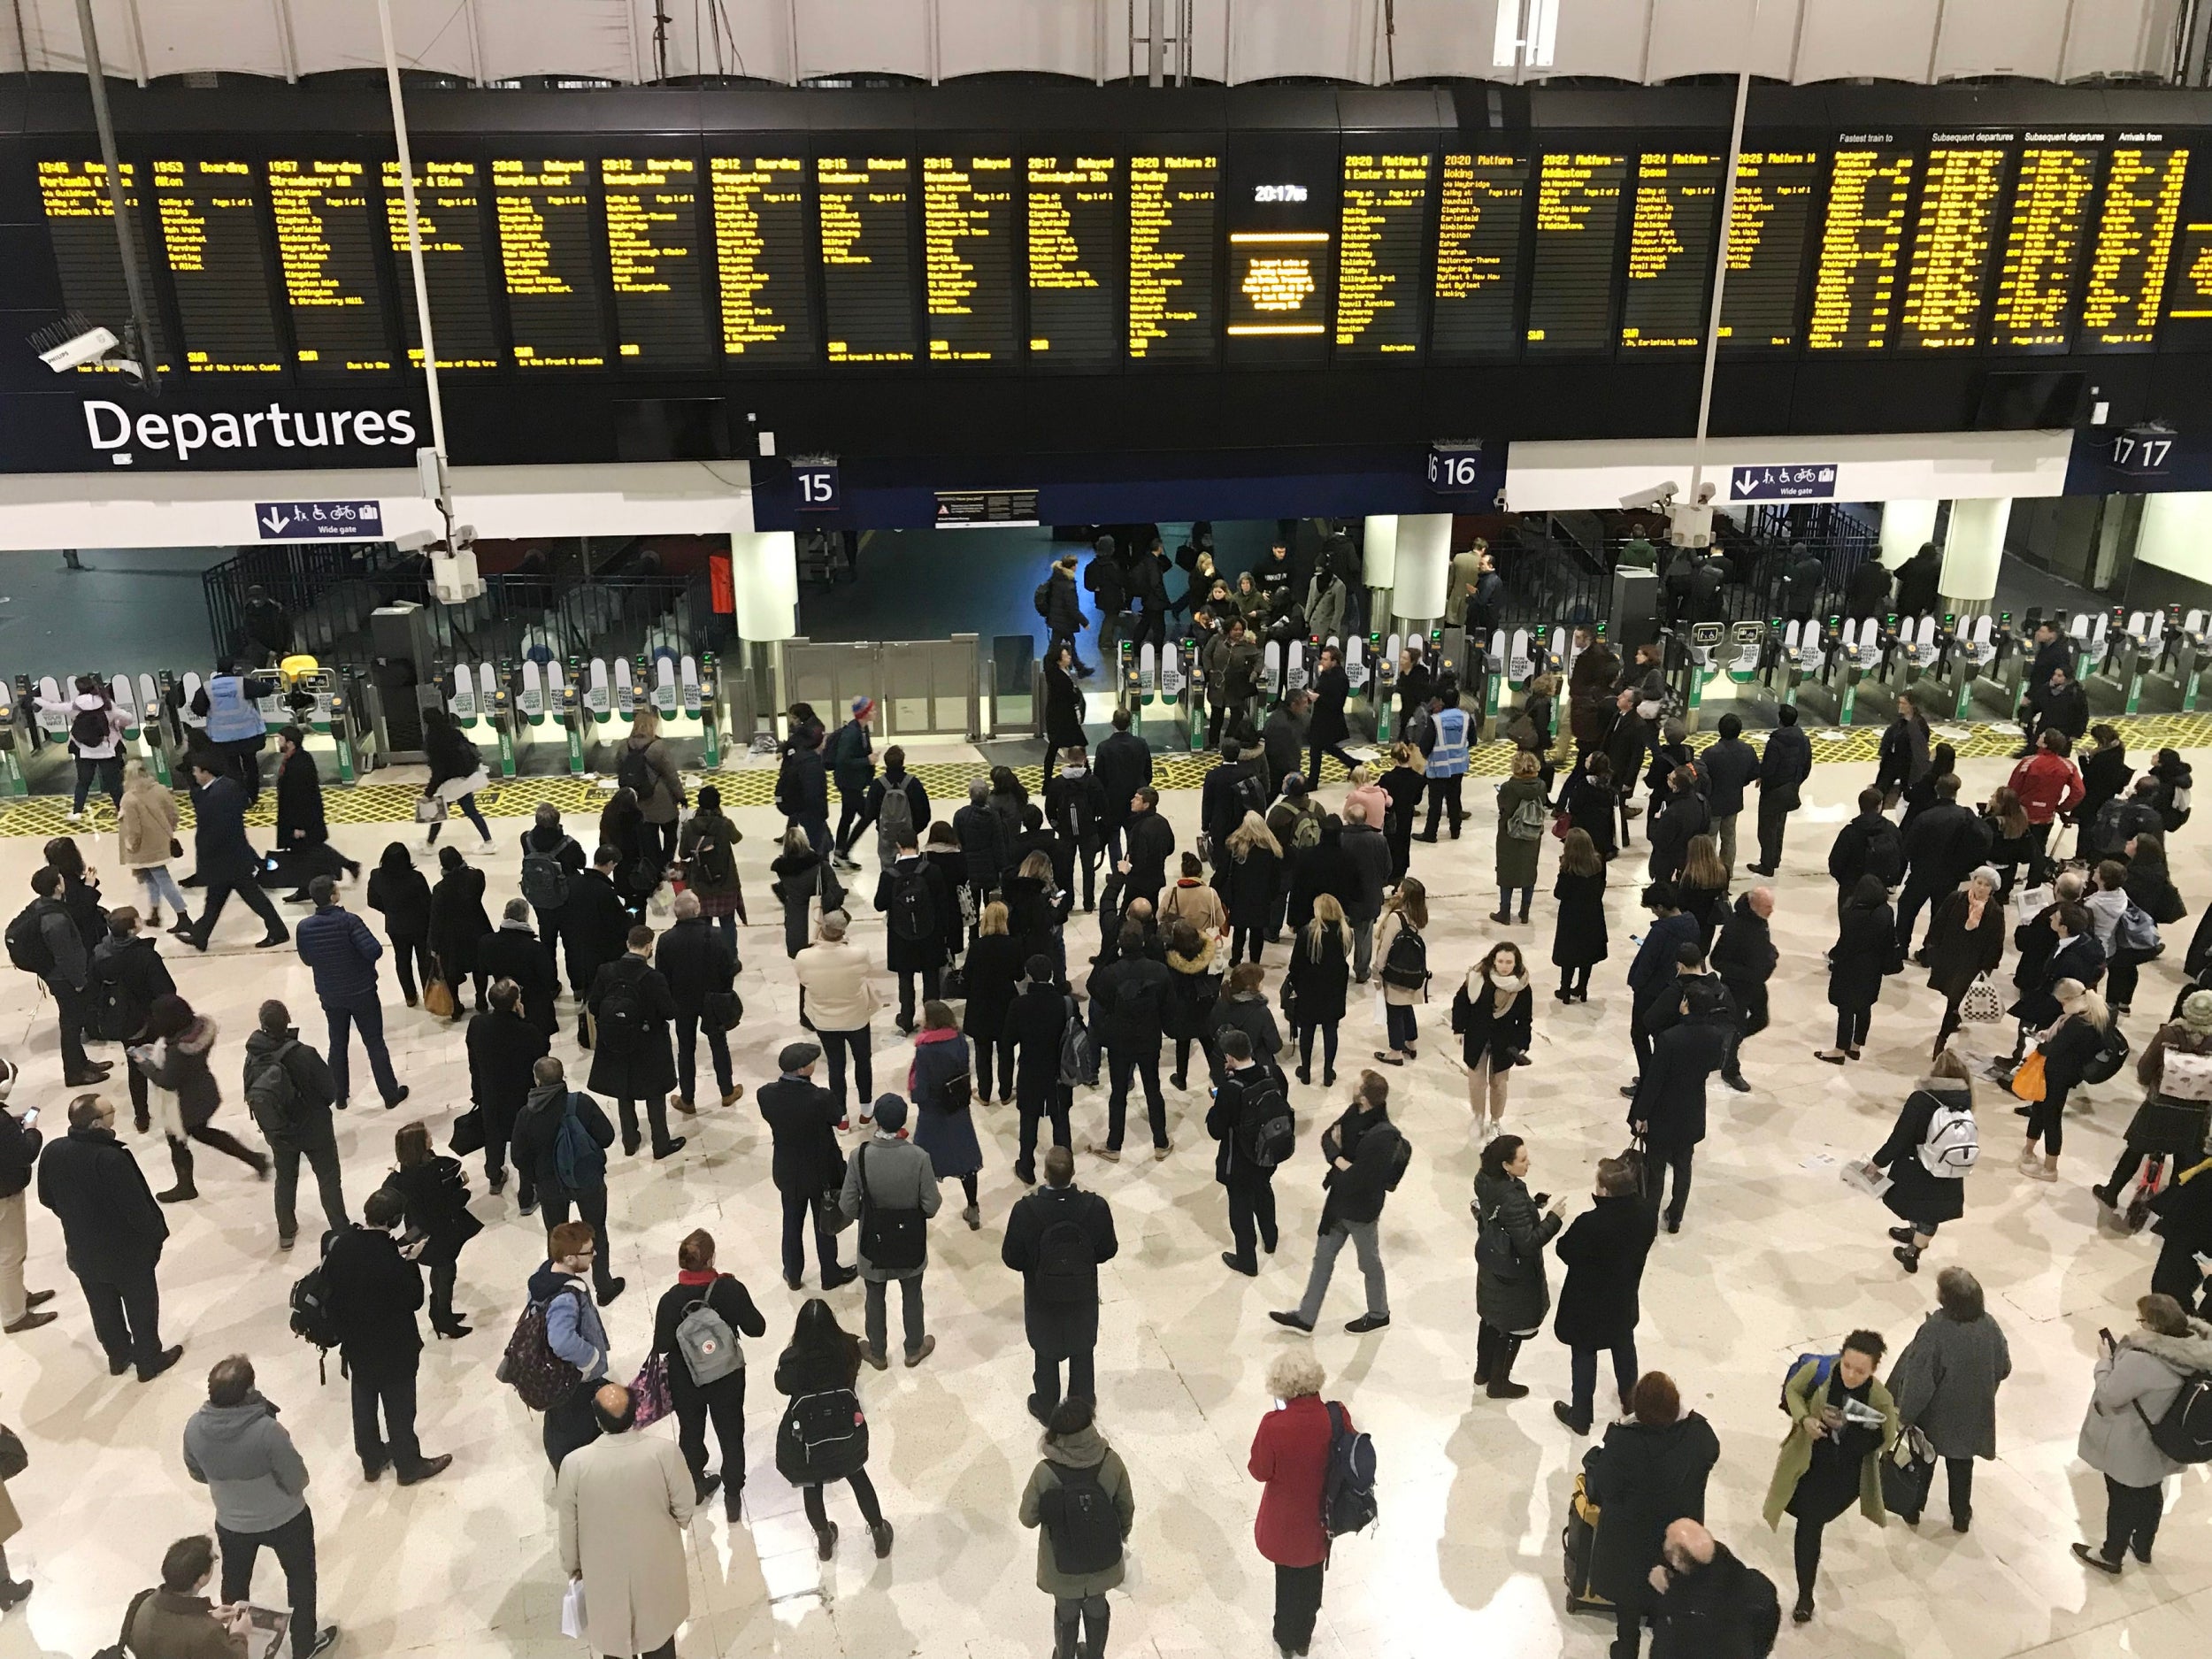 During previous rail strikes, services on the main lines have operated at about half the usual frequency